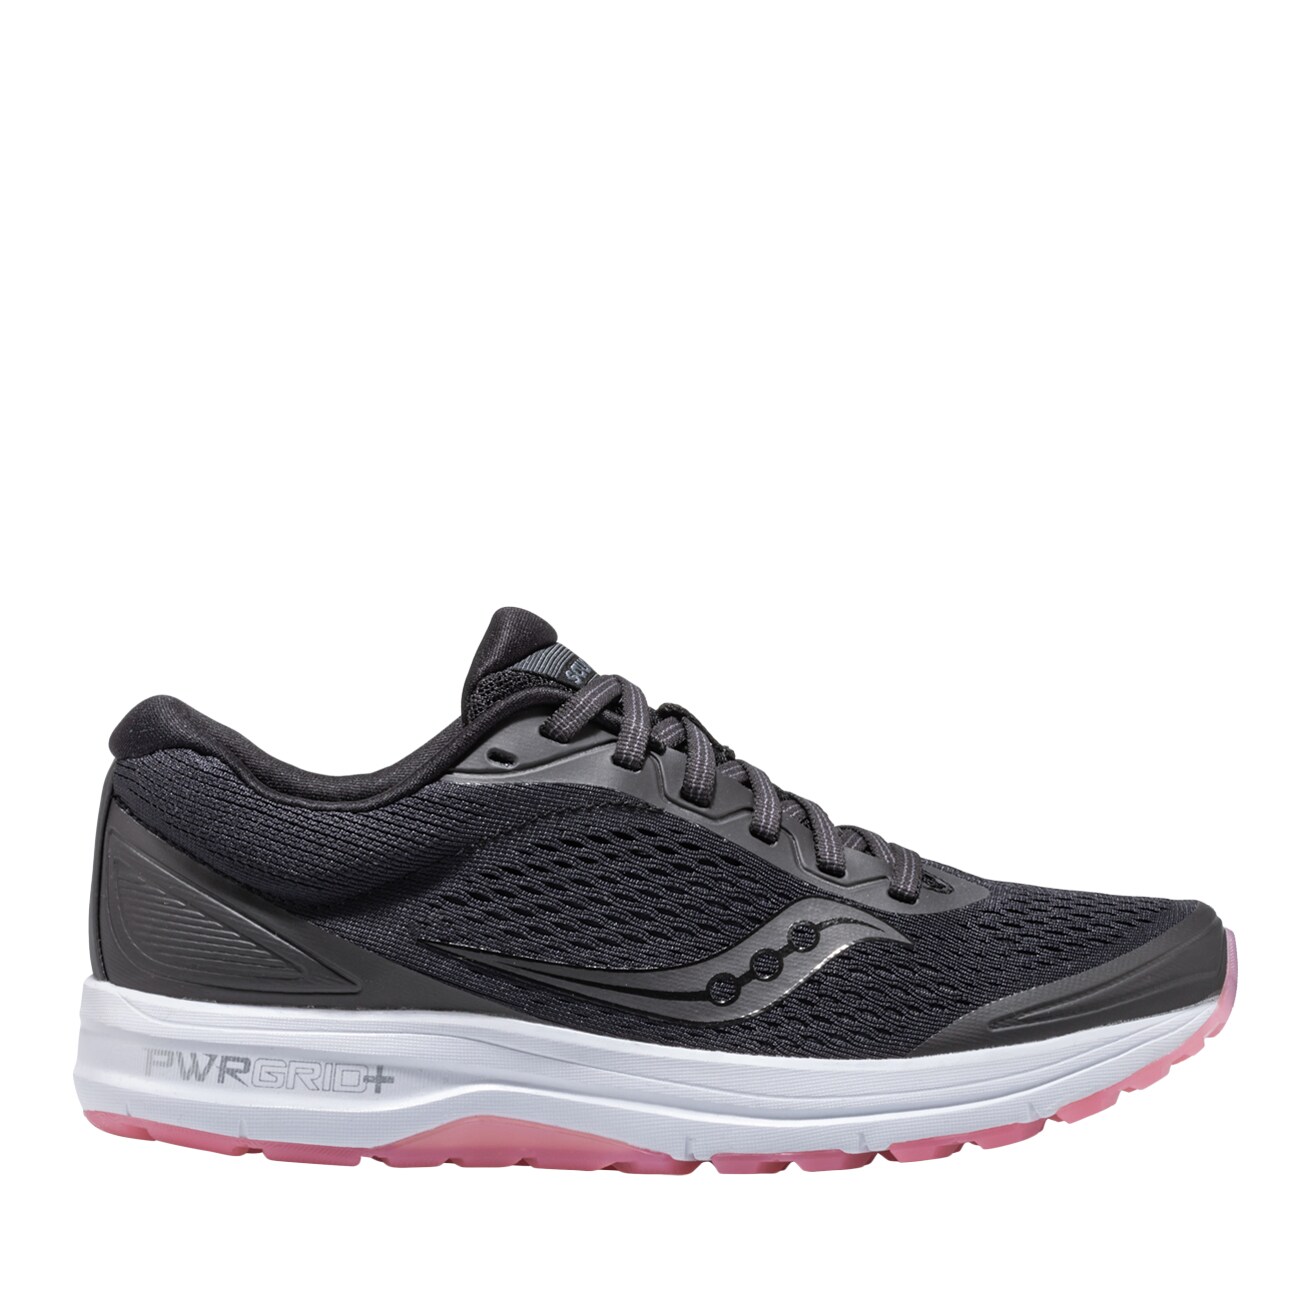 saucony powergrid clarion review